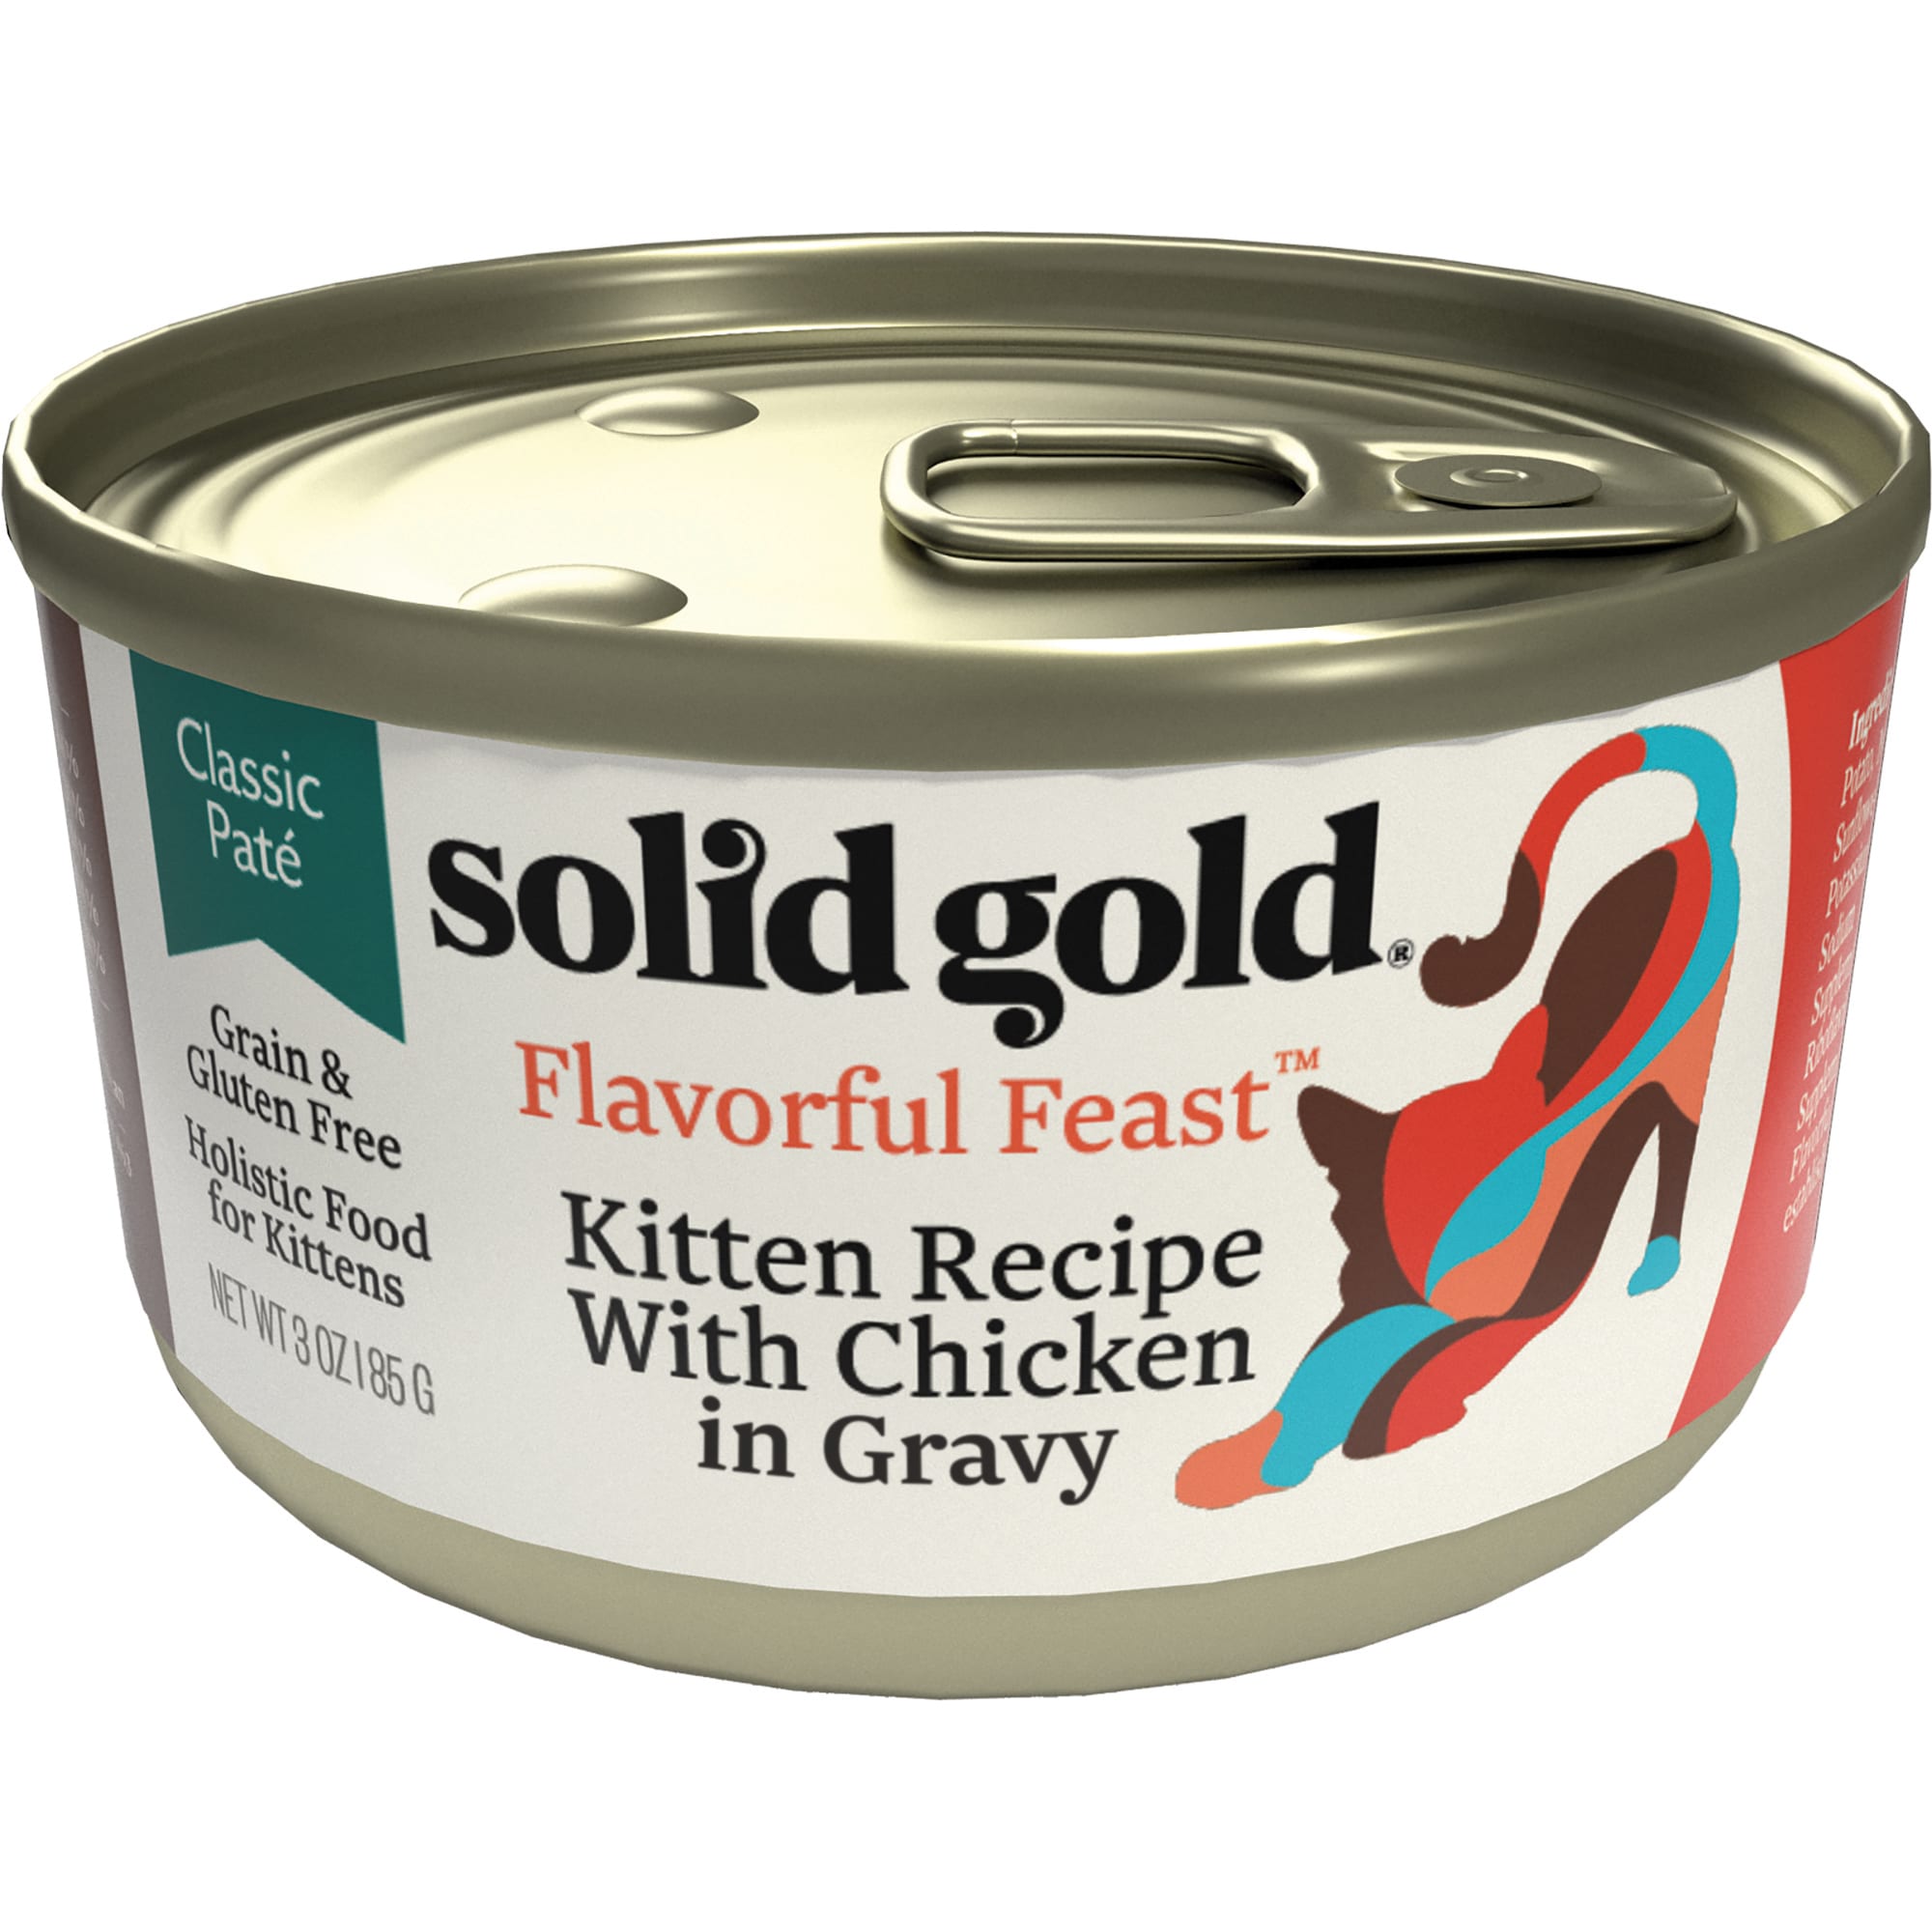 Solid Gold Flavorful Feast Kitten Recipe With Chicken in Gravy Holistic